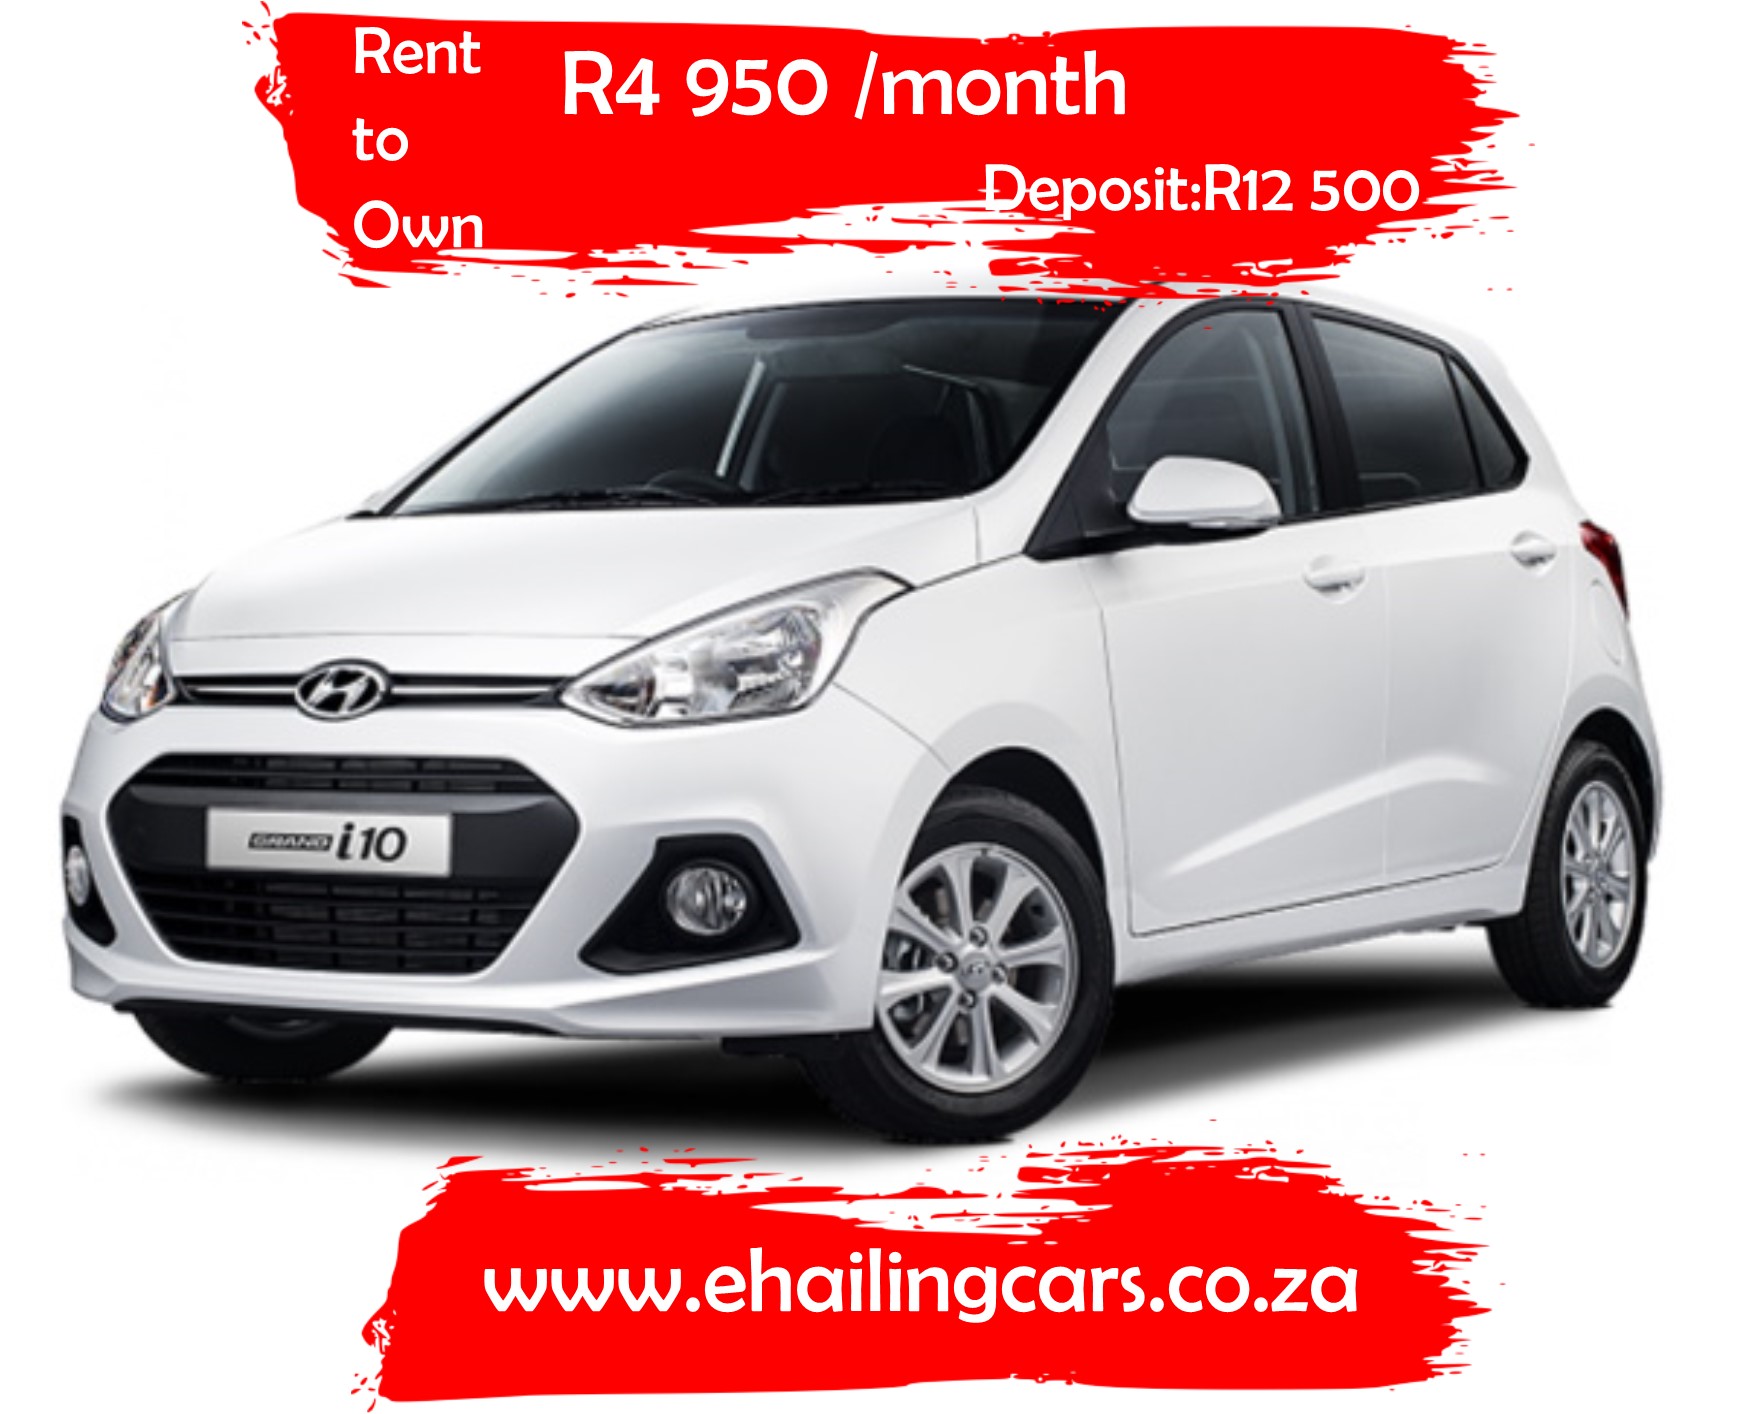 Rent to Own : Hyundai I10, Monthly Rent: R4950, Deposit: 12 500